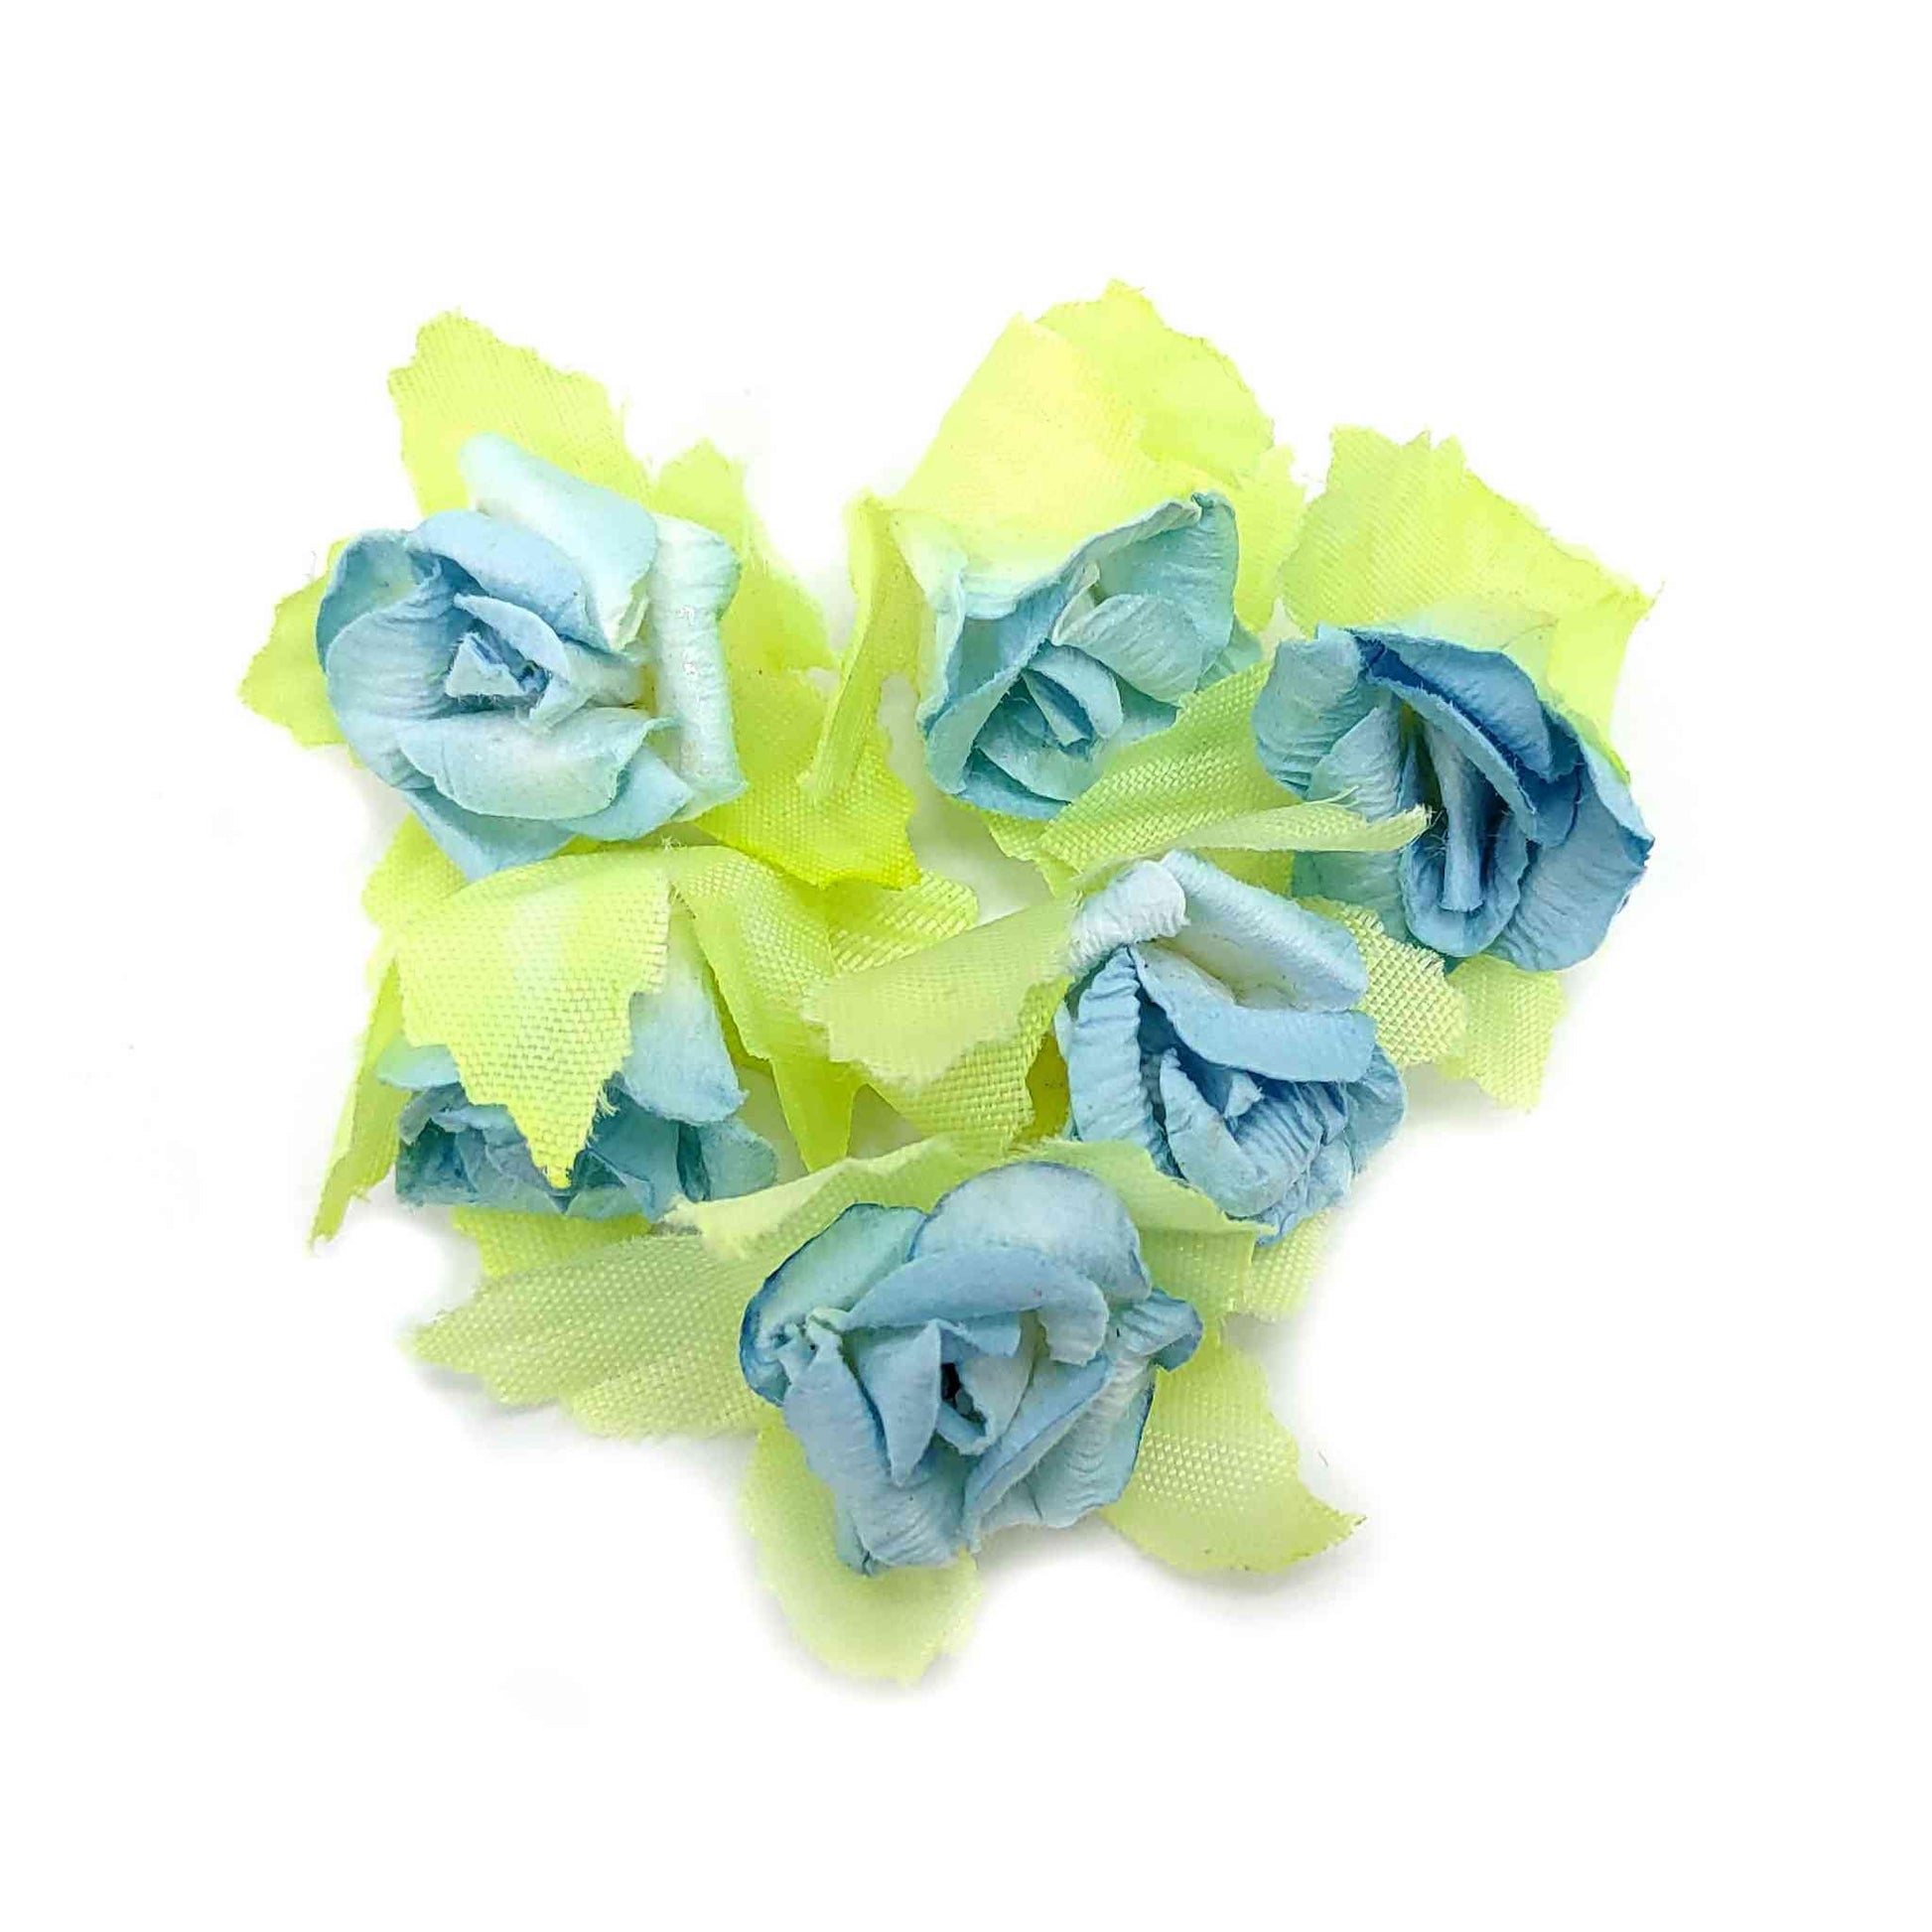 Indian Petals Beautiful Small Paper Flowers with Leaf for DIY Craft, Trouseau Packing or Decoration (Bunch of 12) - Design 30, Steel Blue - Indian Petals